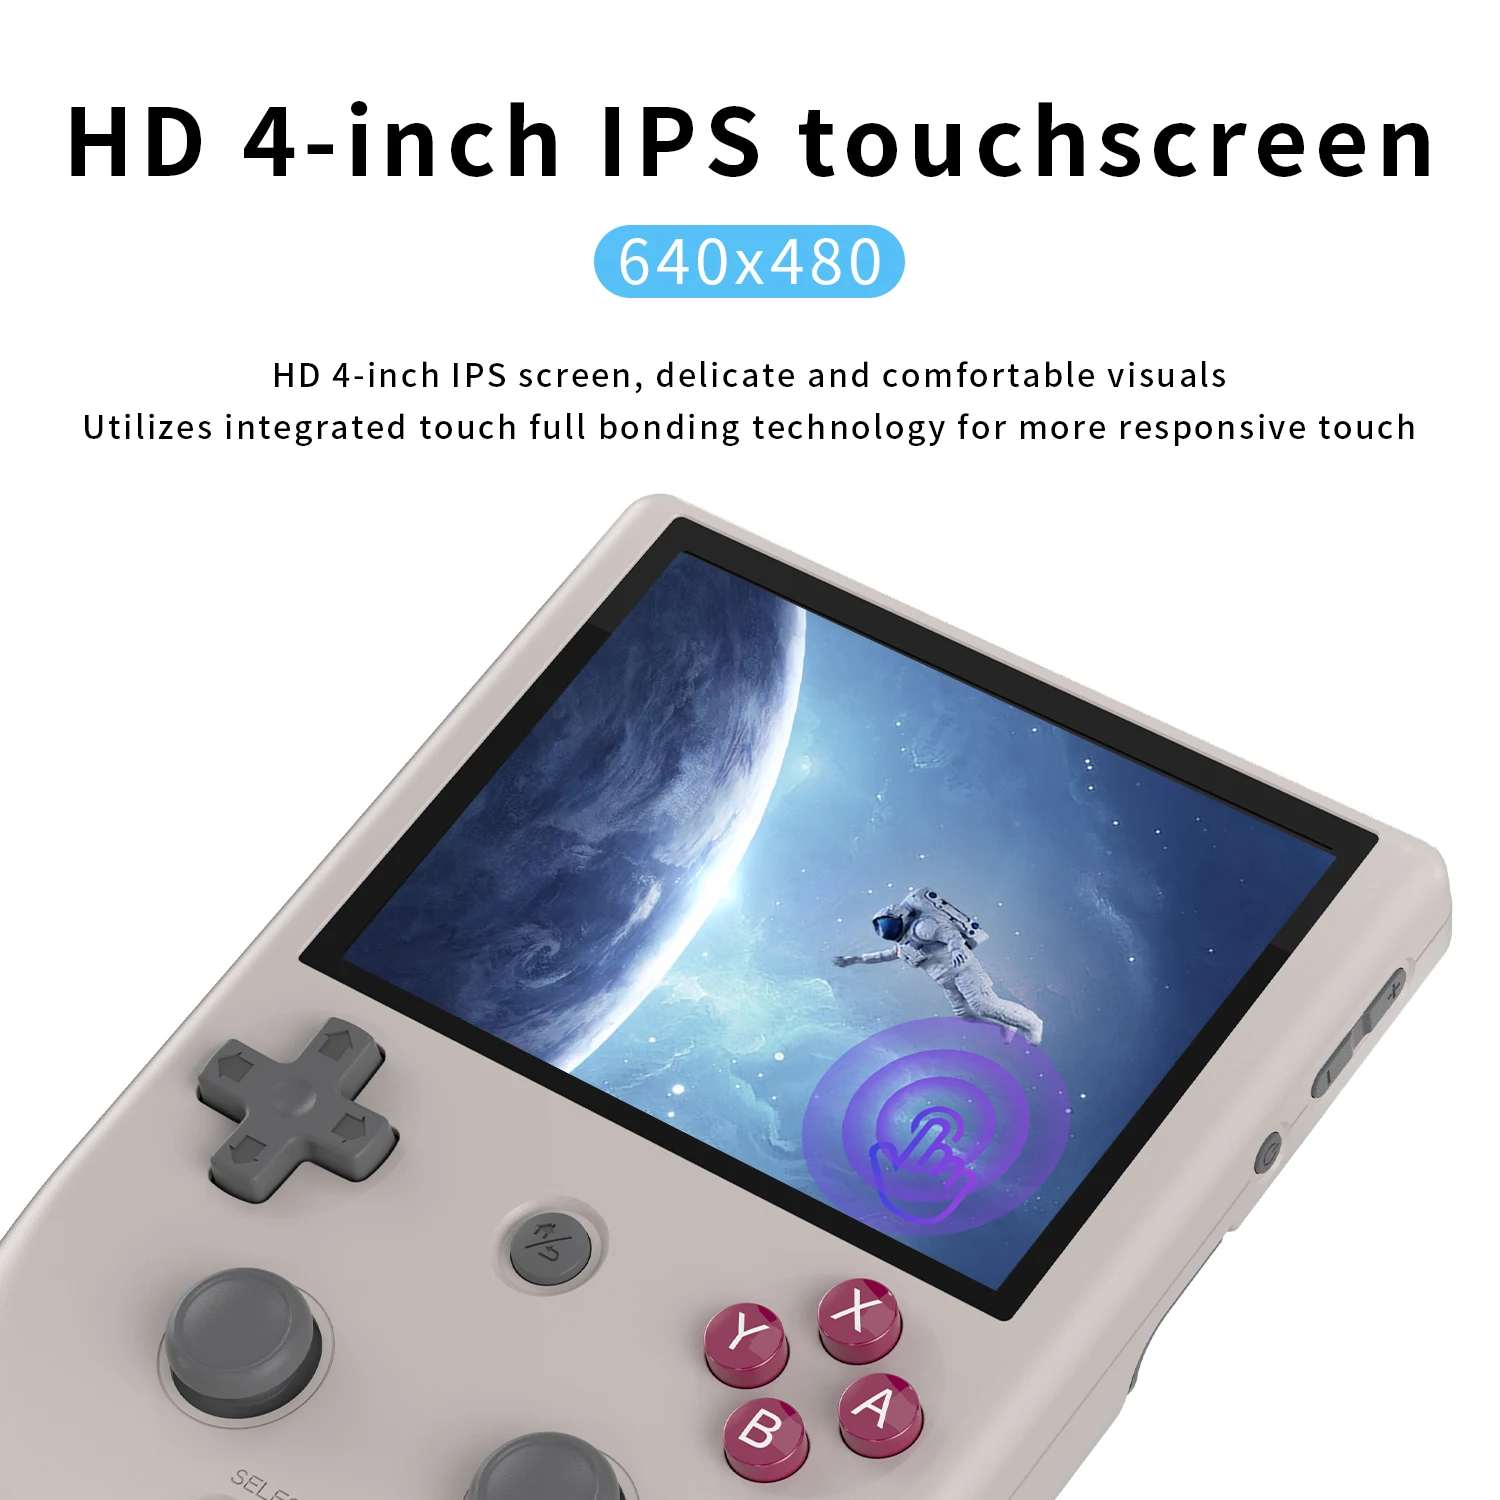 ANBERNIC RG405V Handheld Game Console 4'' IPS Touch Screen Android